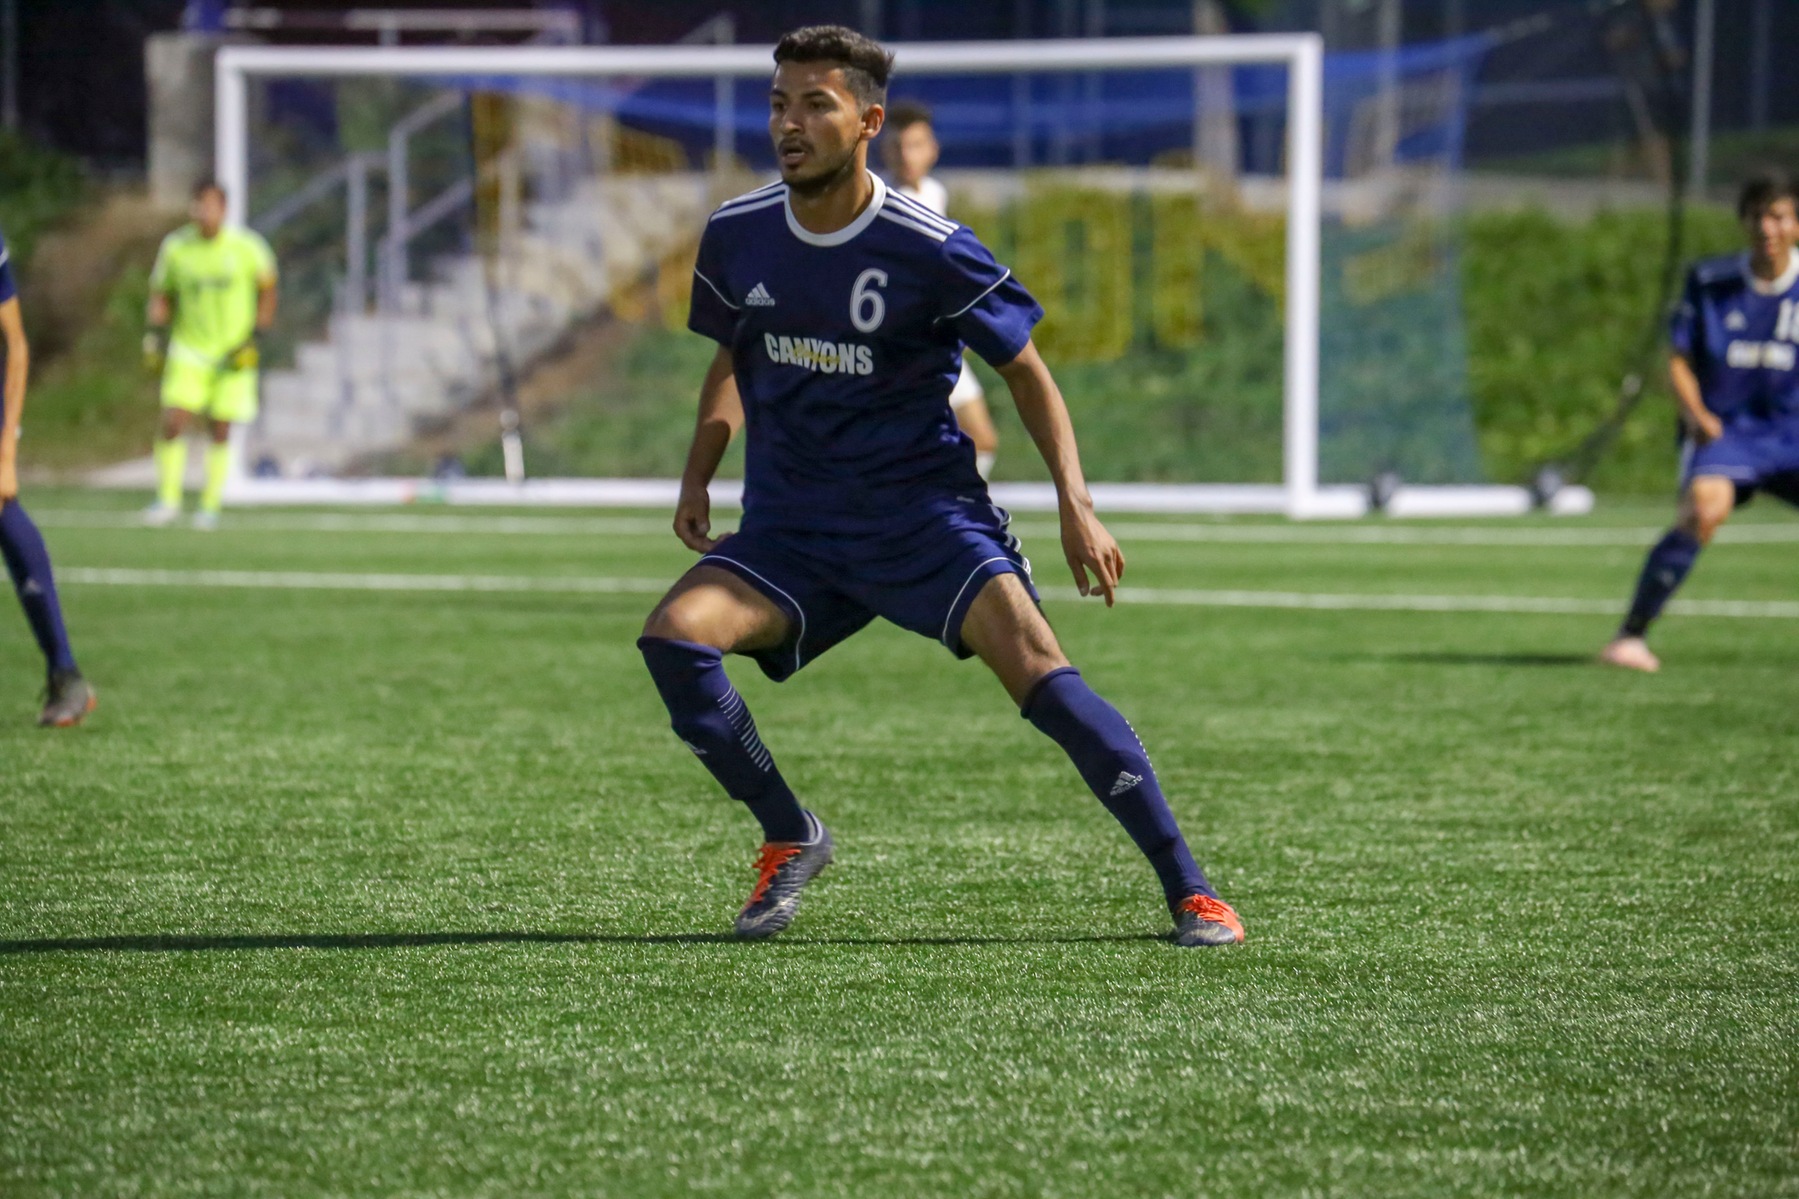 College of the Canyons sophomore Jorge Rojas was a key factor in helping the Cougar men's soccer program win its first Western State Conference championship in program history.